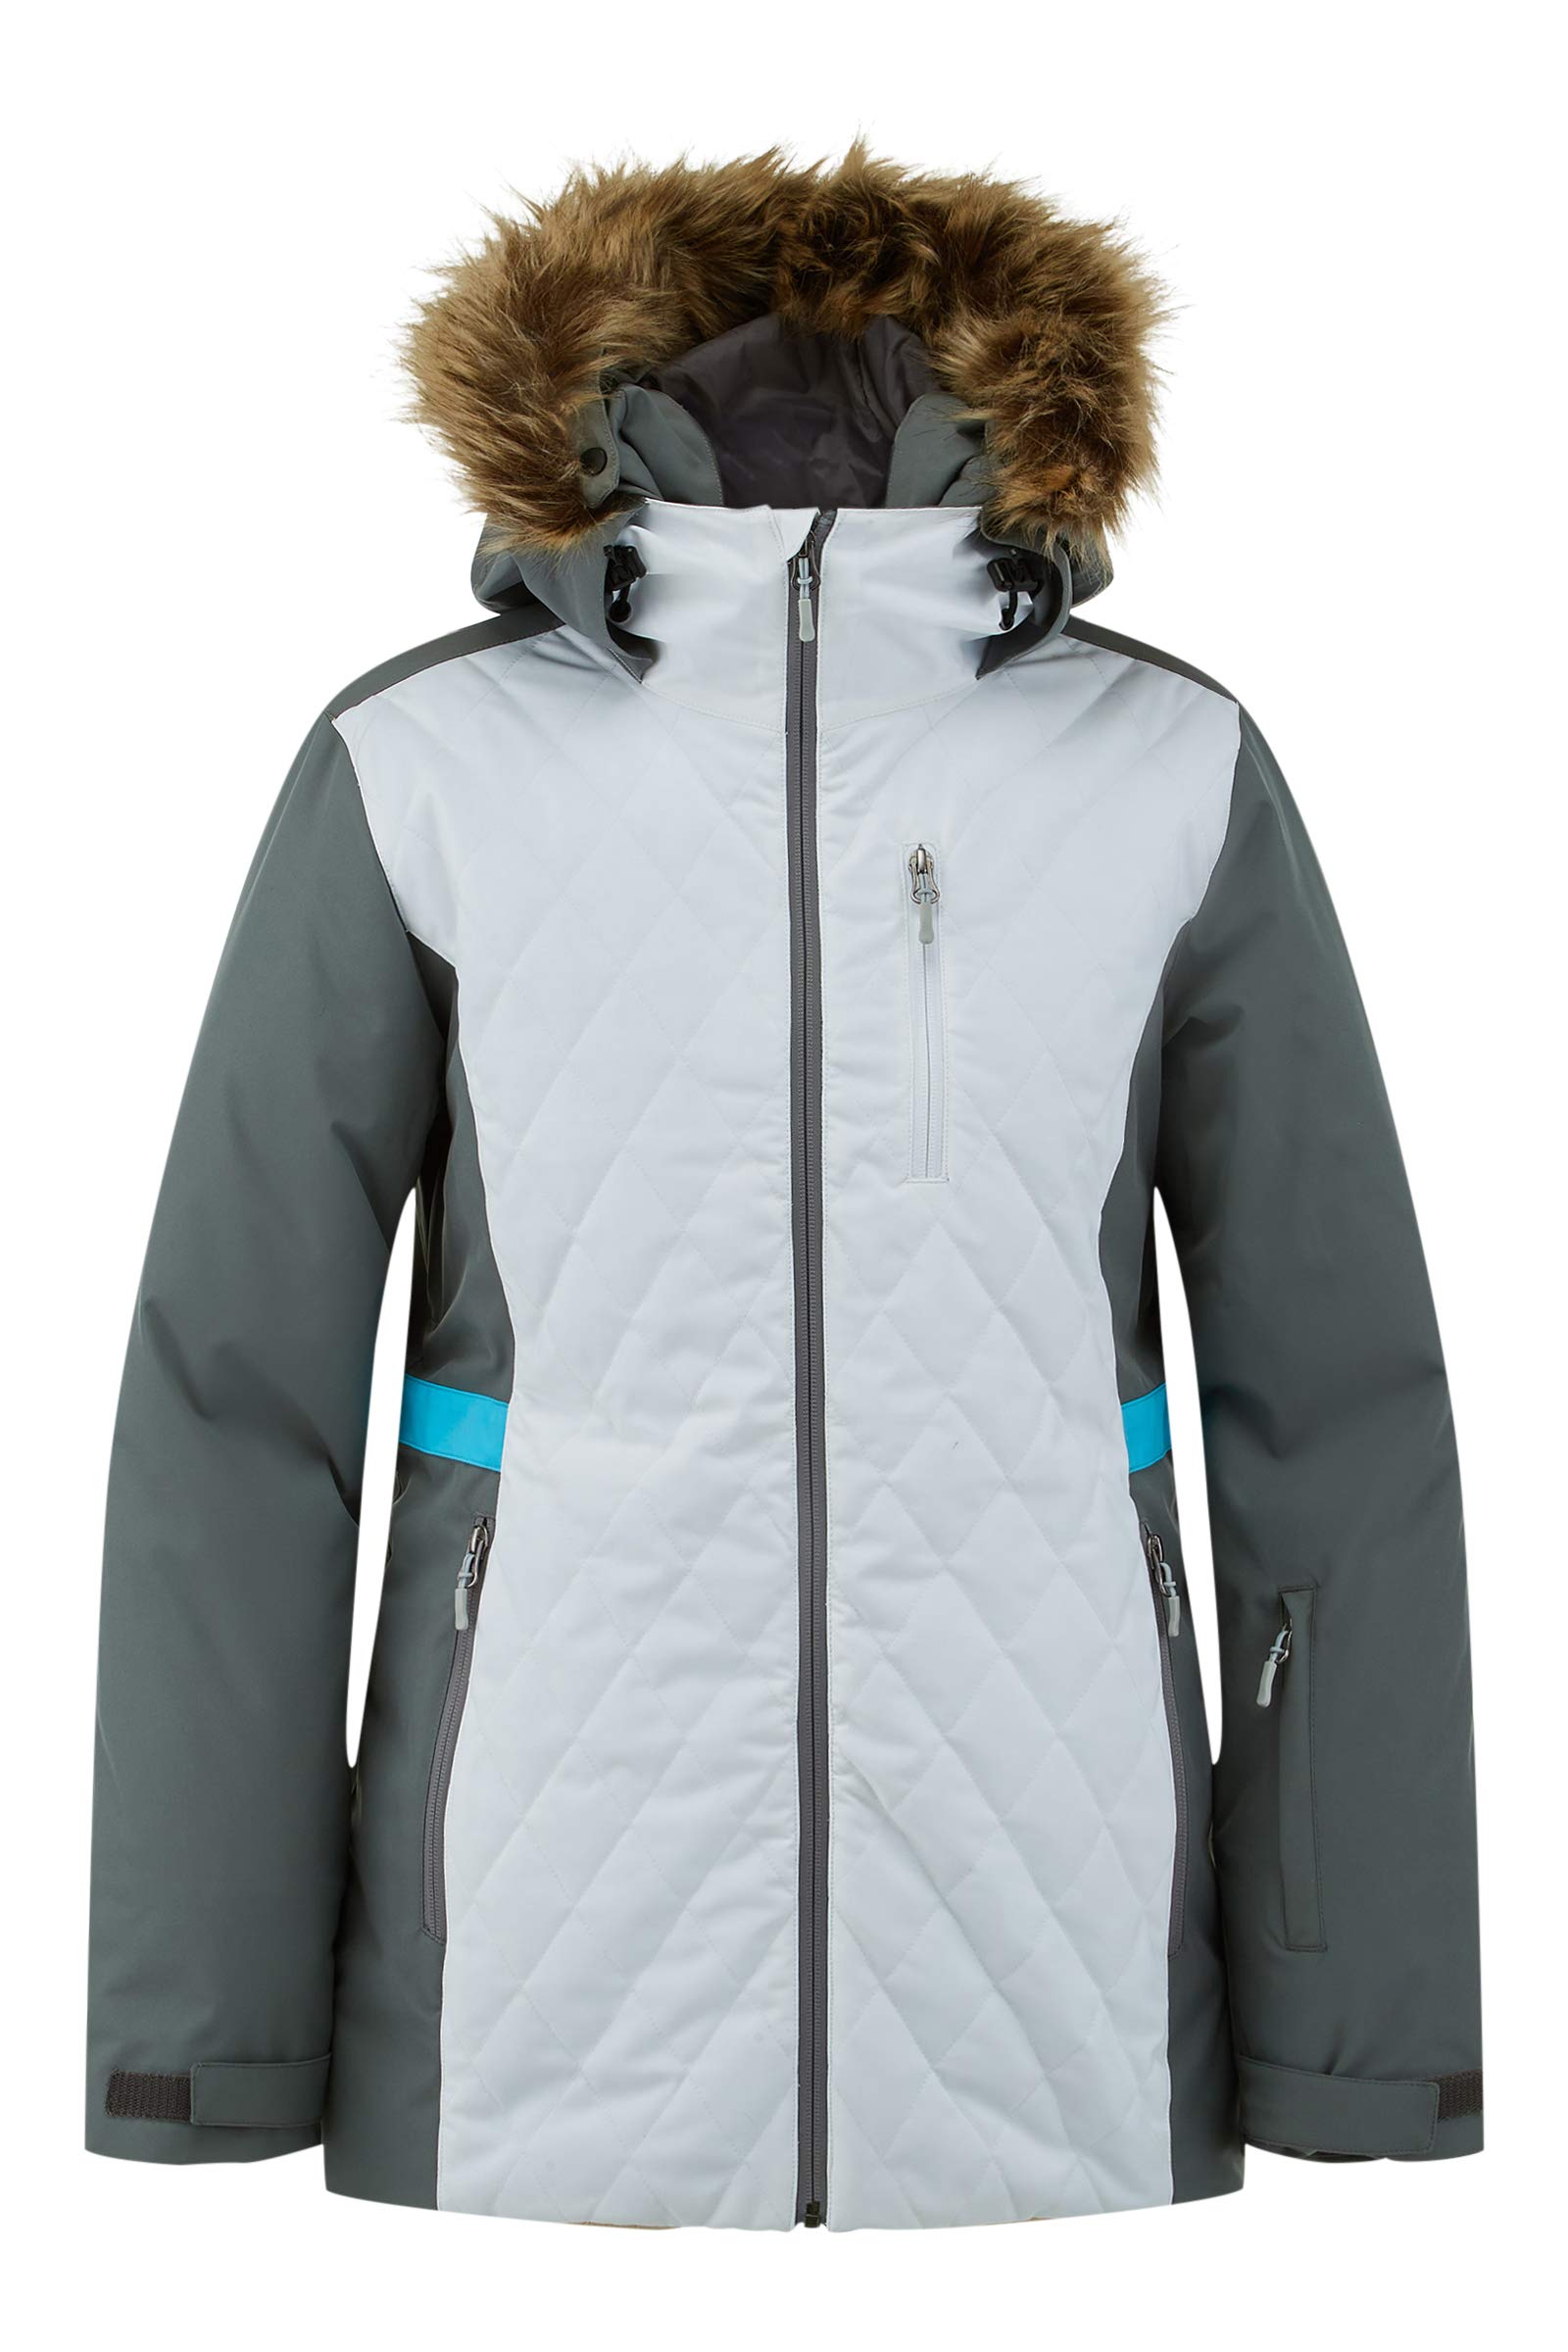 Spyder Active Sports Women's Crossover Insulated Ski Jacket